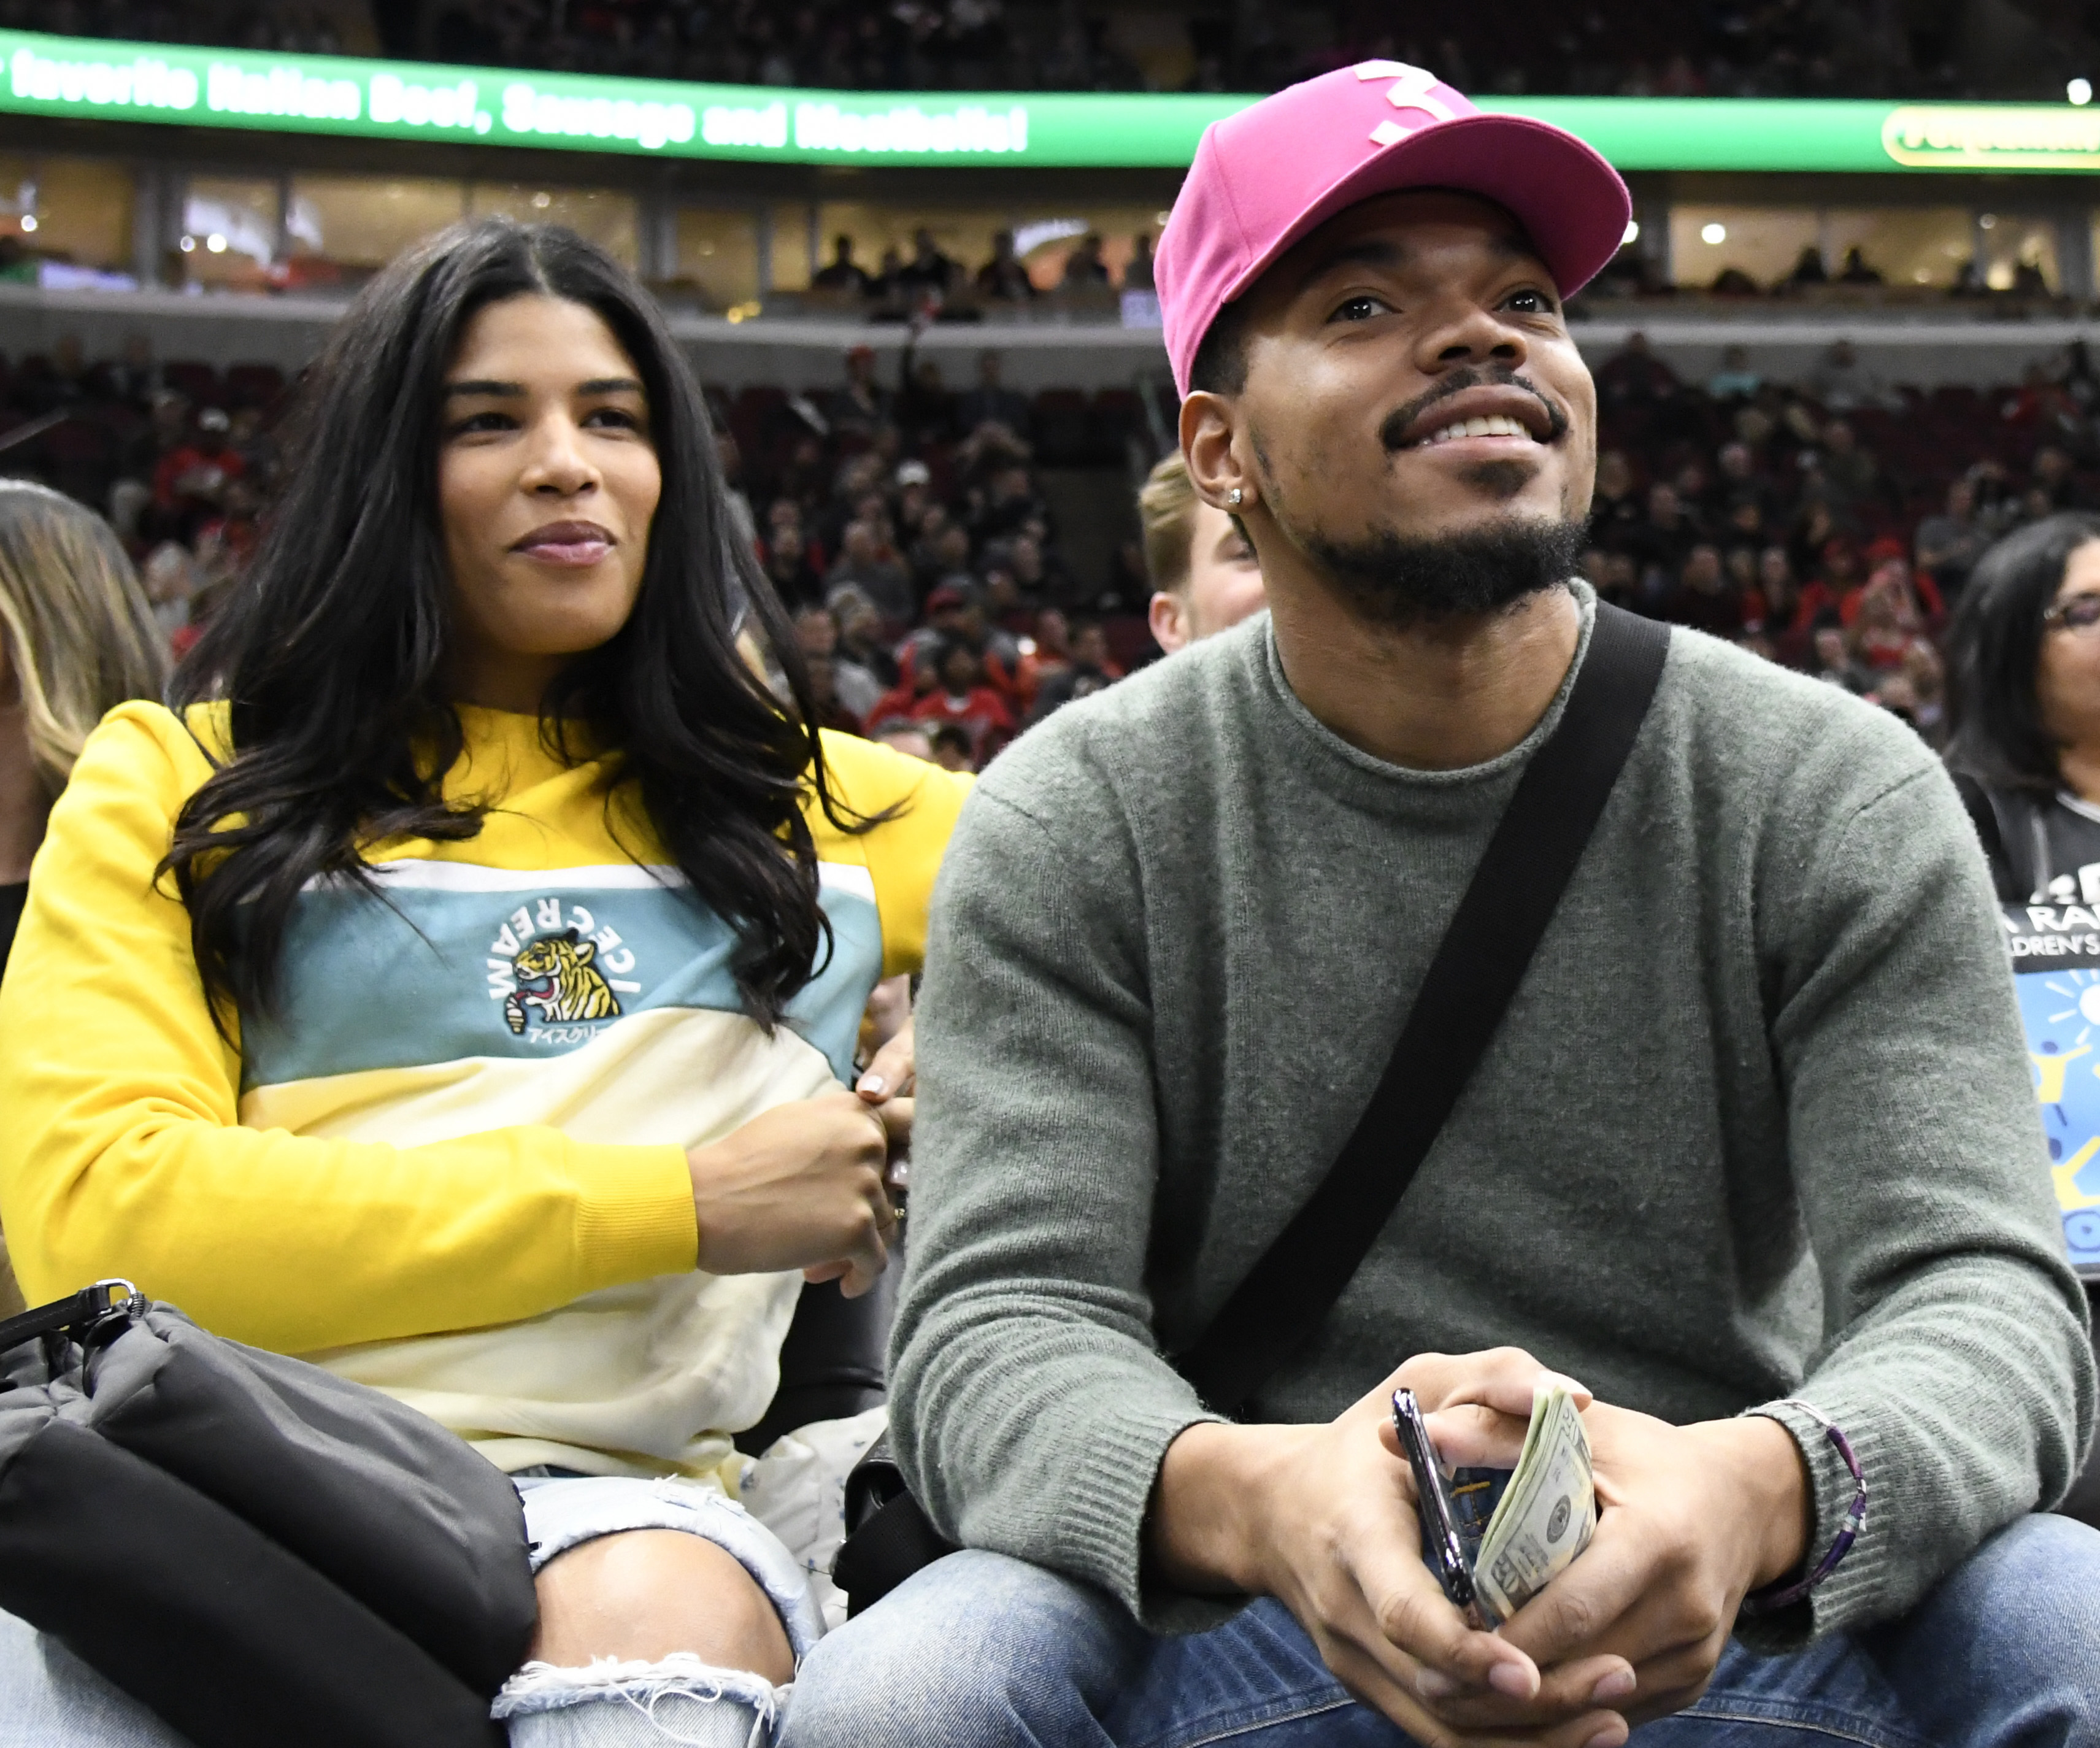 Chance the Rapper marries longtime girlfriend | Inquirer Entertainment